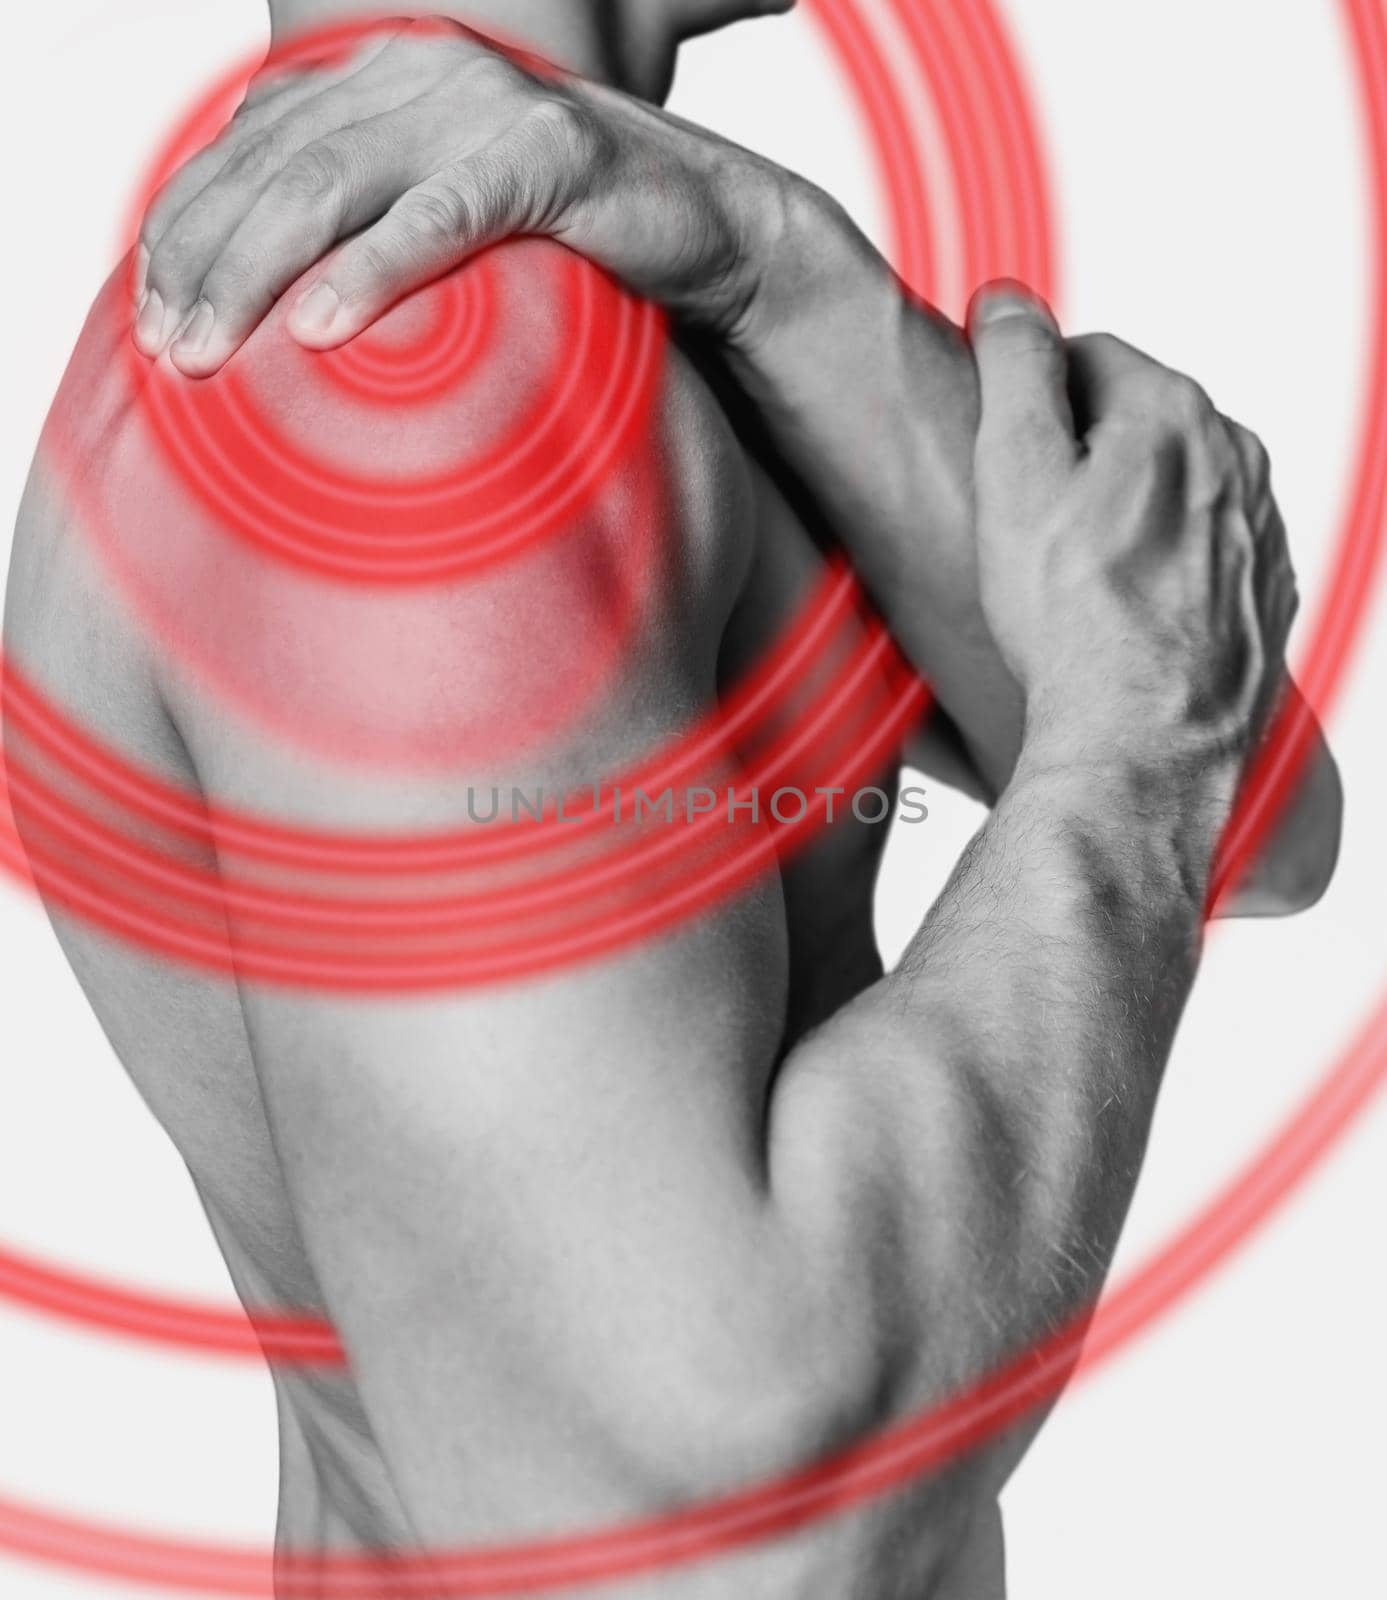 Acute pain in a male shoulder. Monochrome image, isolated on a white background. Pain area of red color.